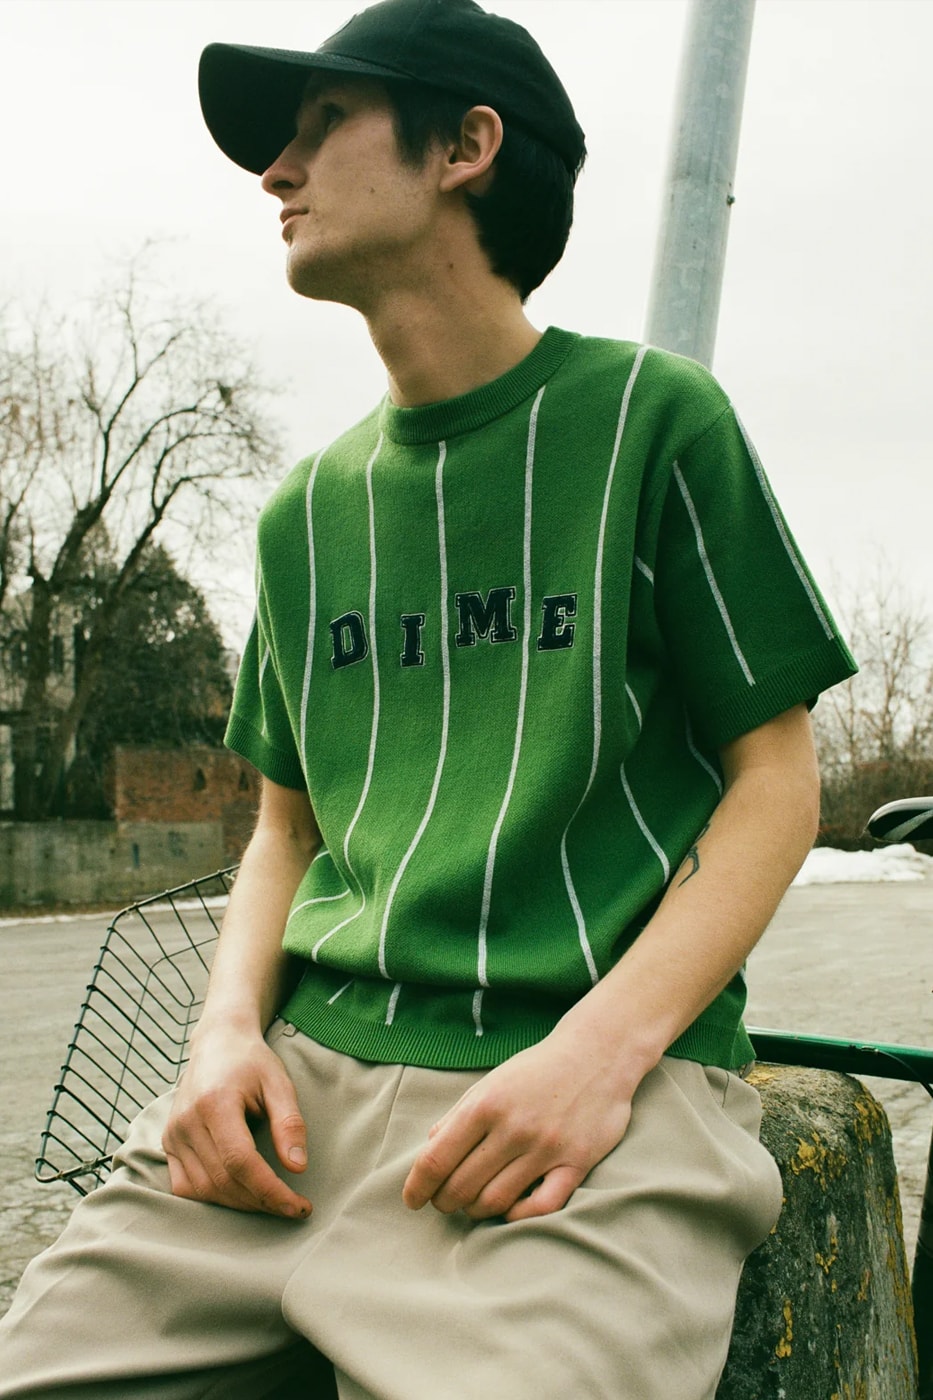 Dime Spring 2024 Delivery 2 Intersects Skate Culture With the Soccer Uniform soccer jerseys long sleeves short sleeves montreal skate bran canadian